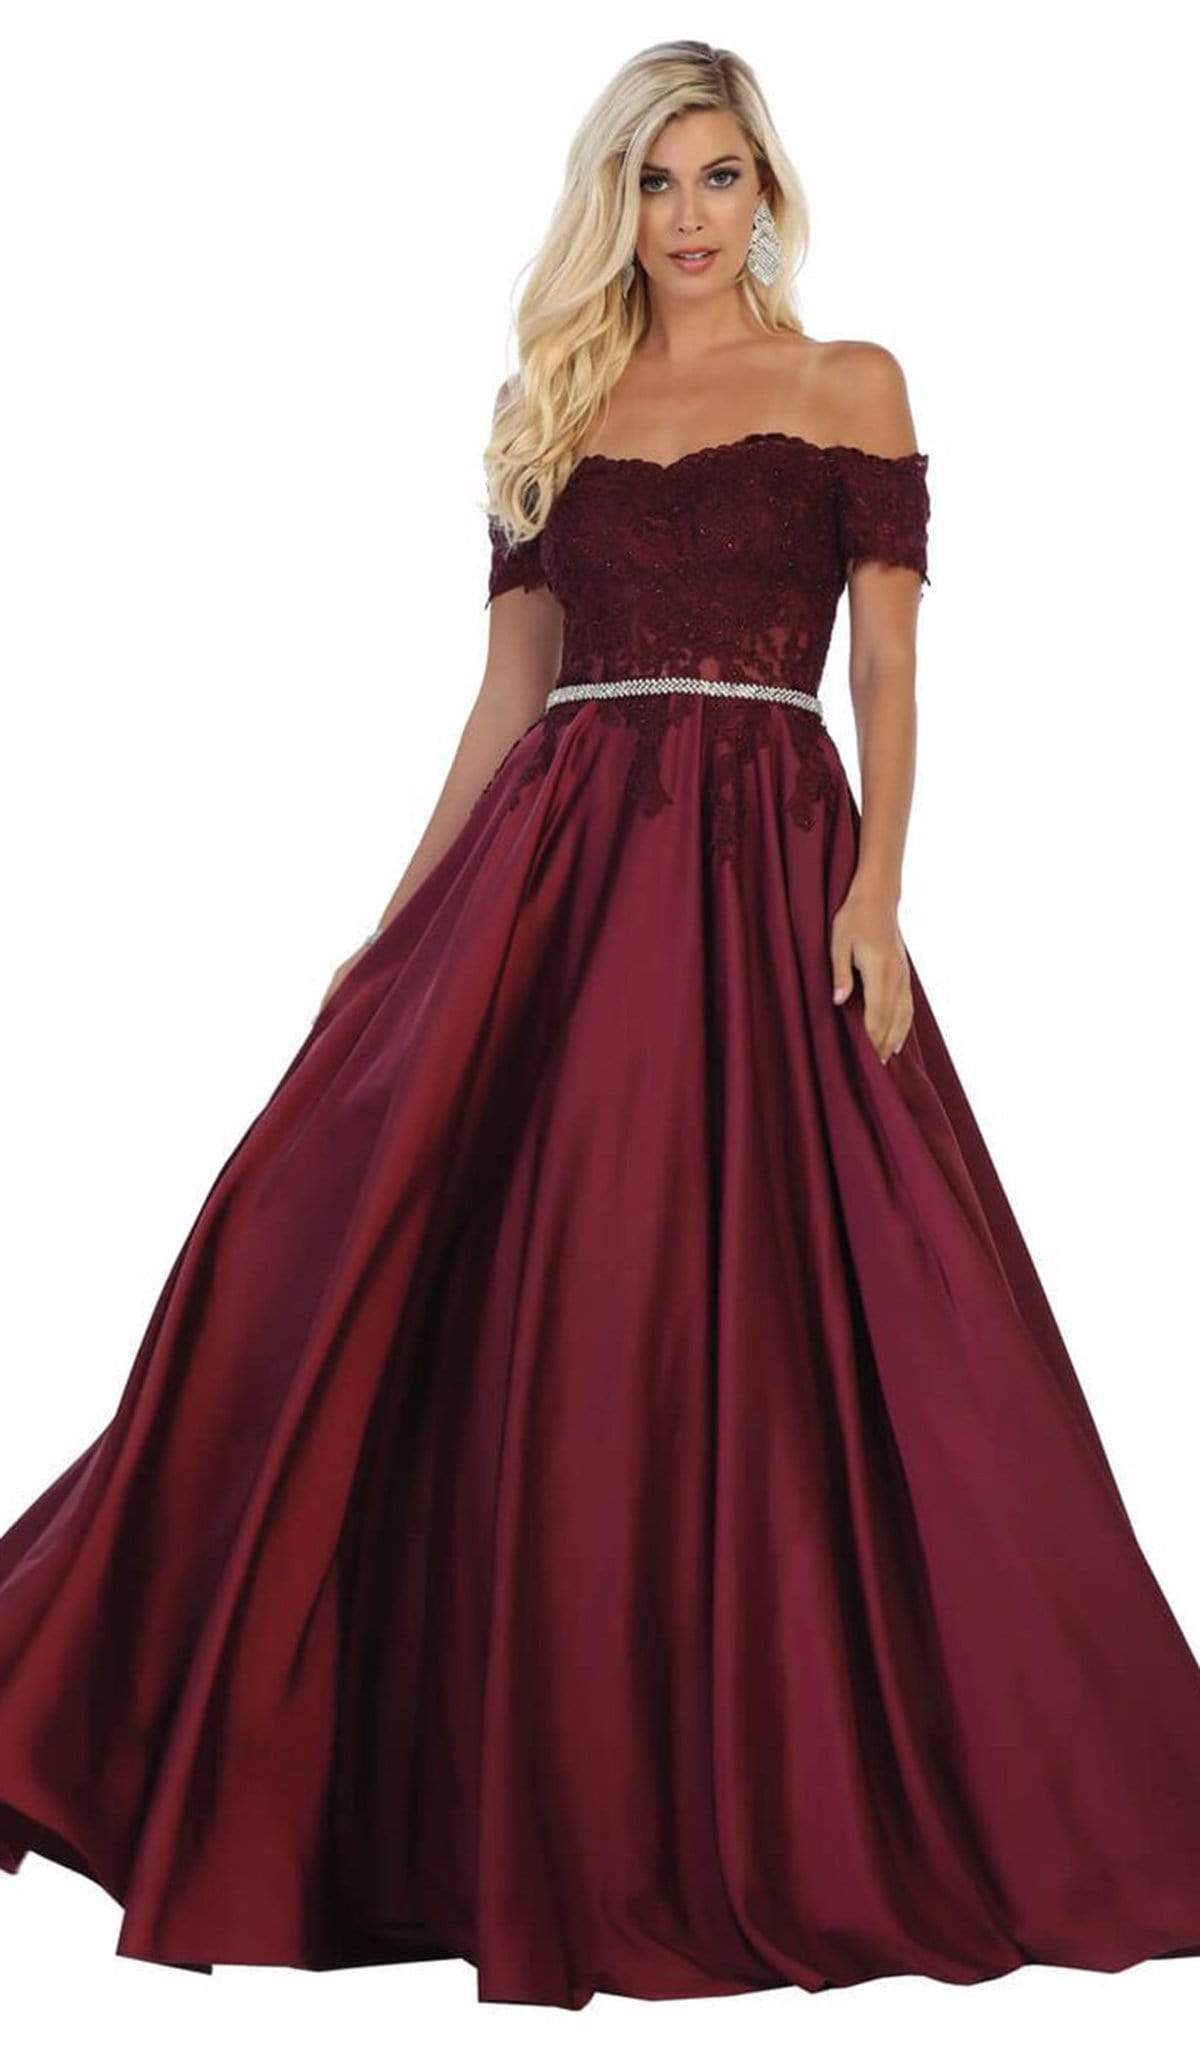 May Queen - MQ1639 Lace Off-Shoulder A-Line Dress Bridesmaid Dresses 4 / Burgundy